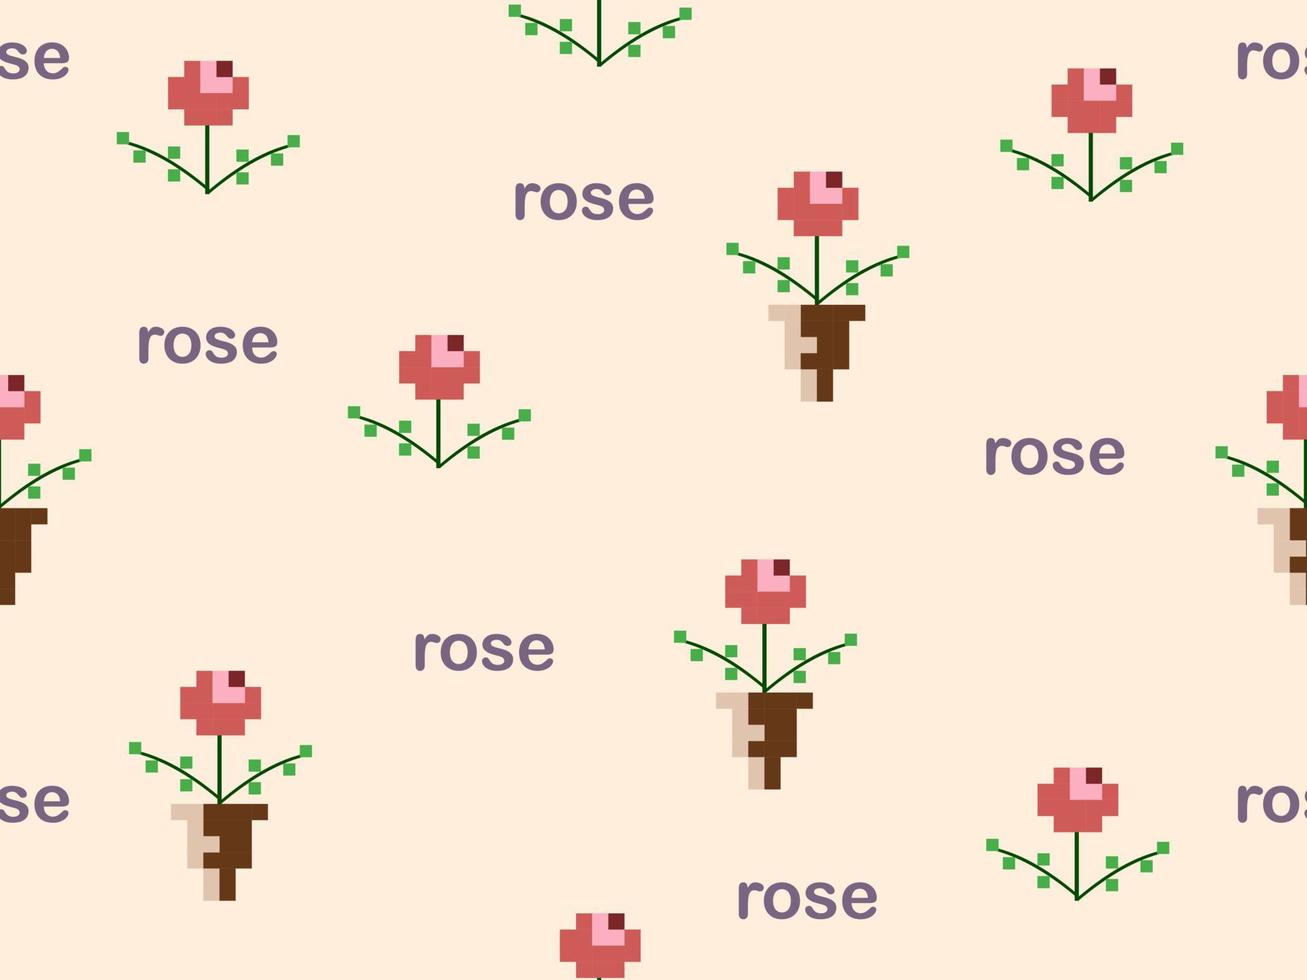 Rose cartoon character seamless pattern on orange background.Pixel style vector